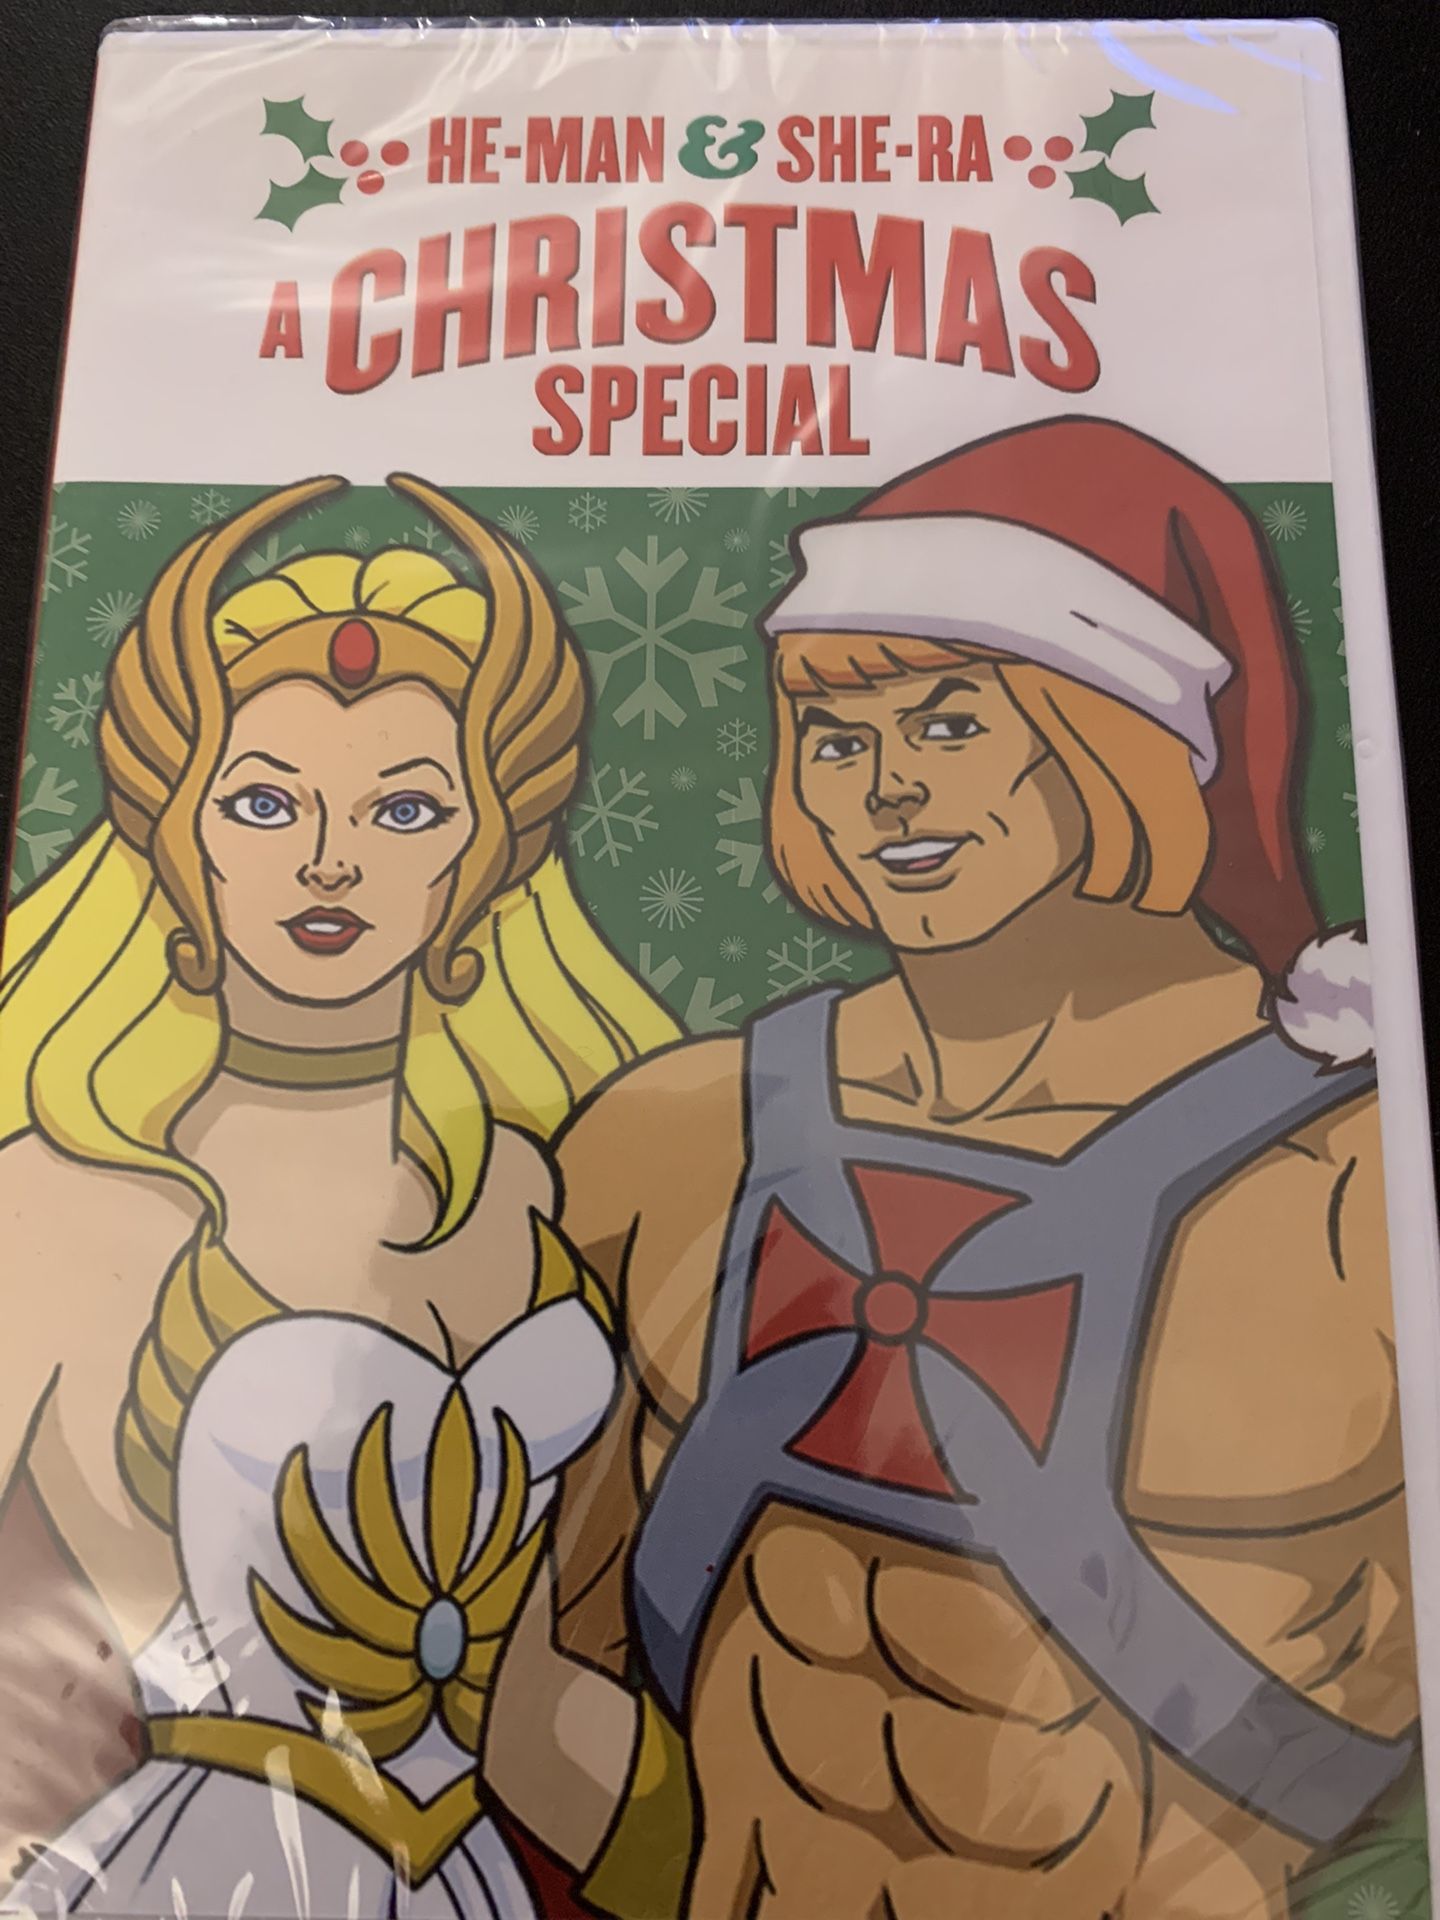 HE-MAN & SHE-RA: A Christmas Special (DVD) NEW!